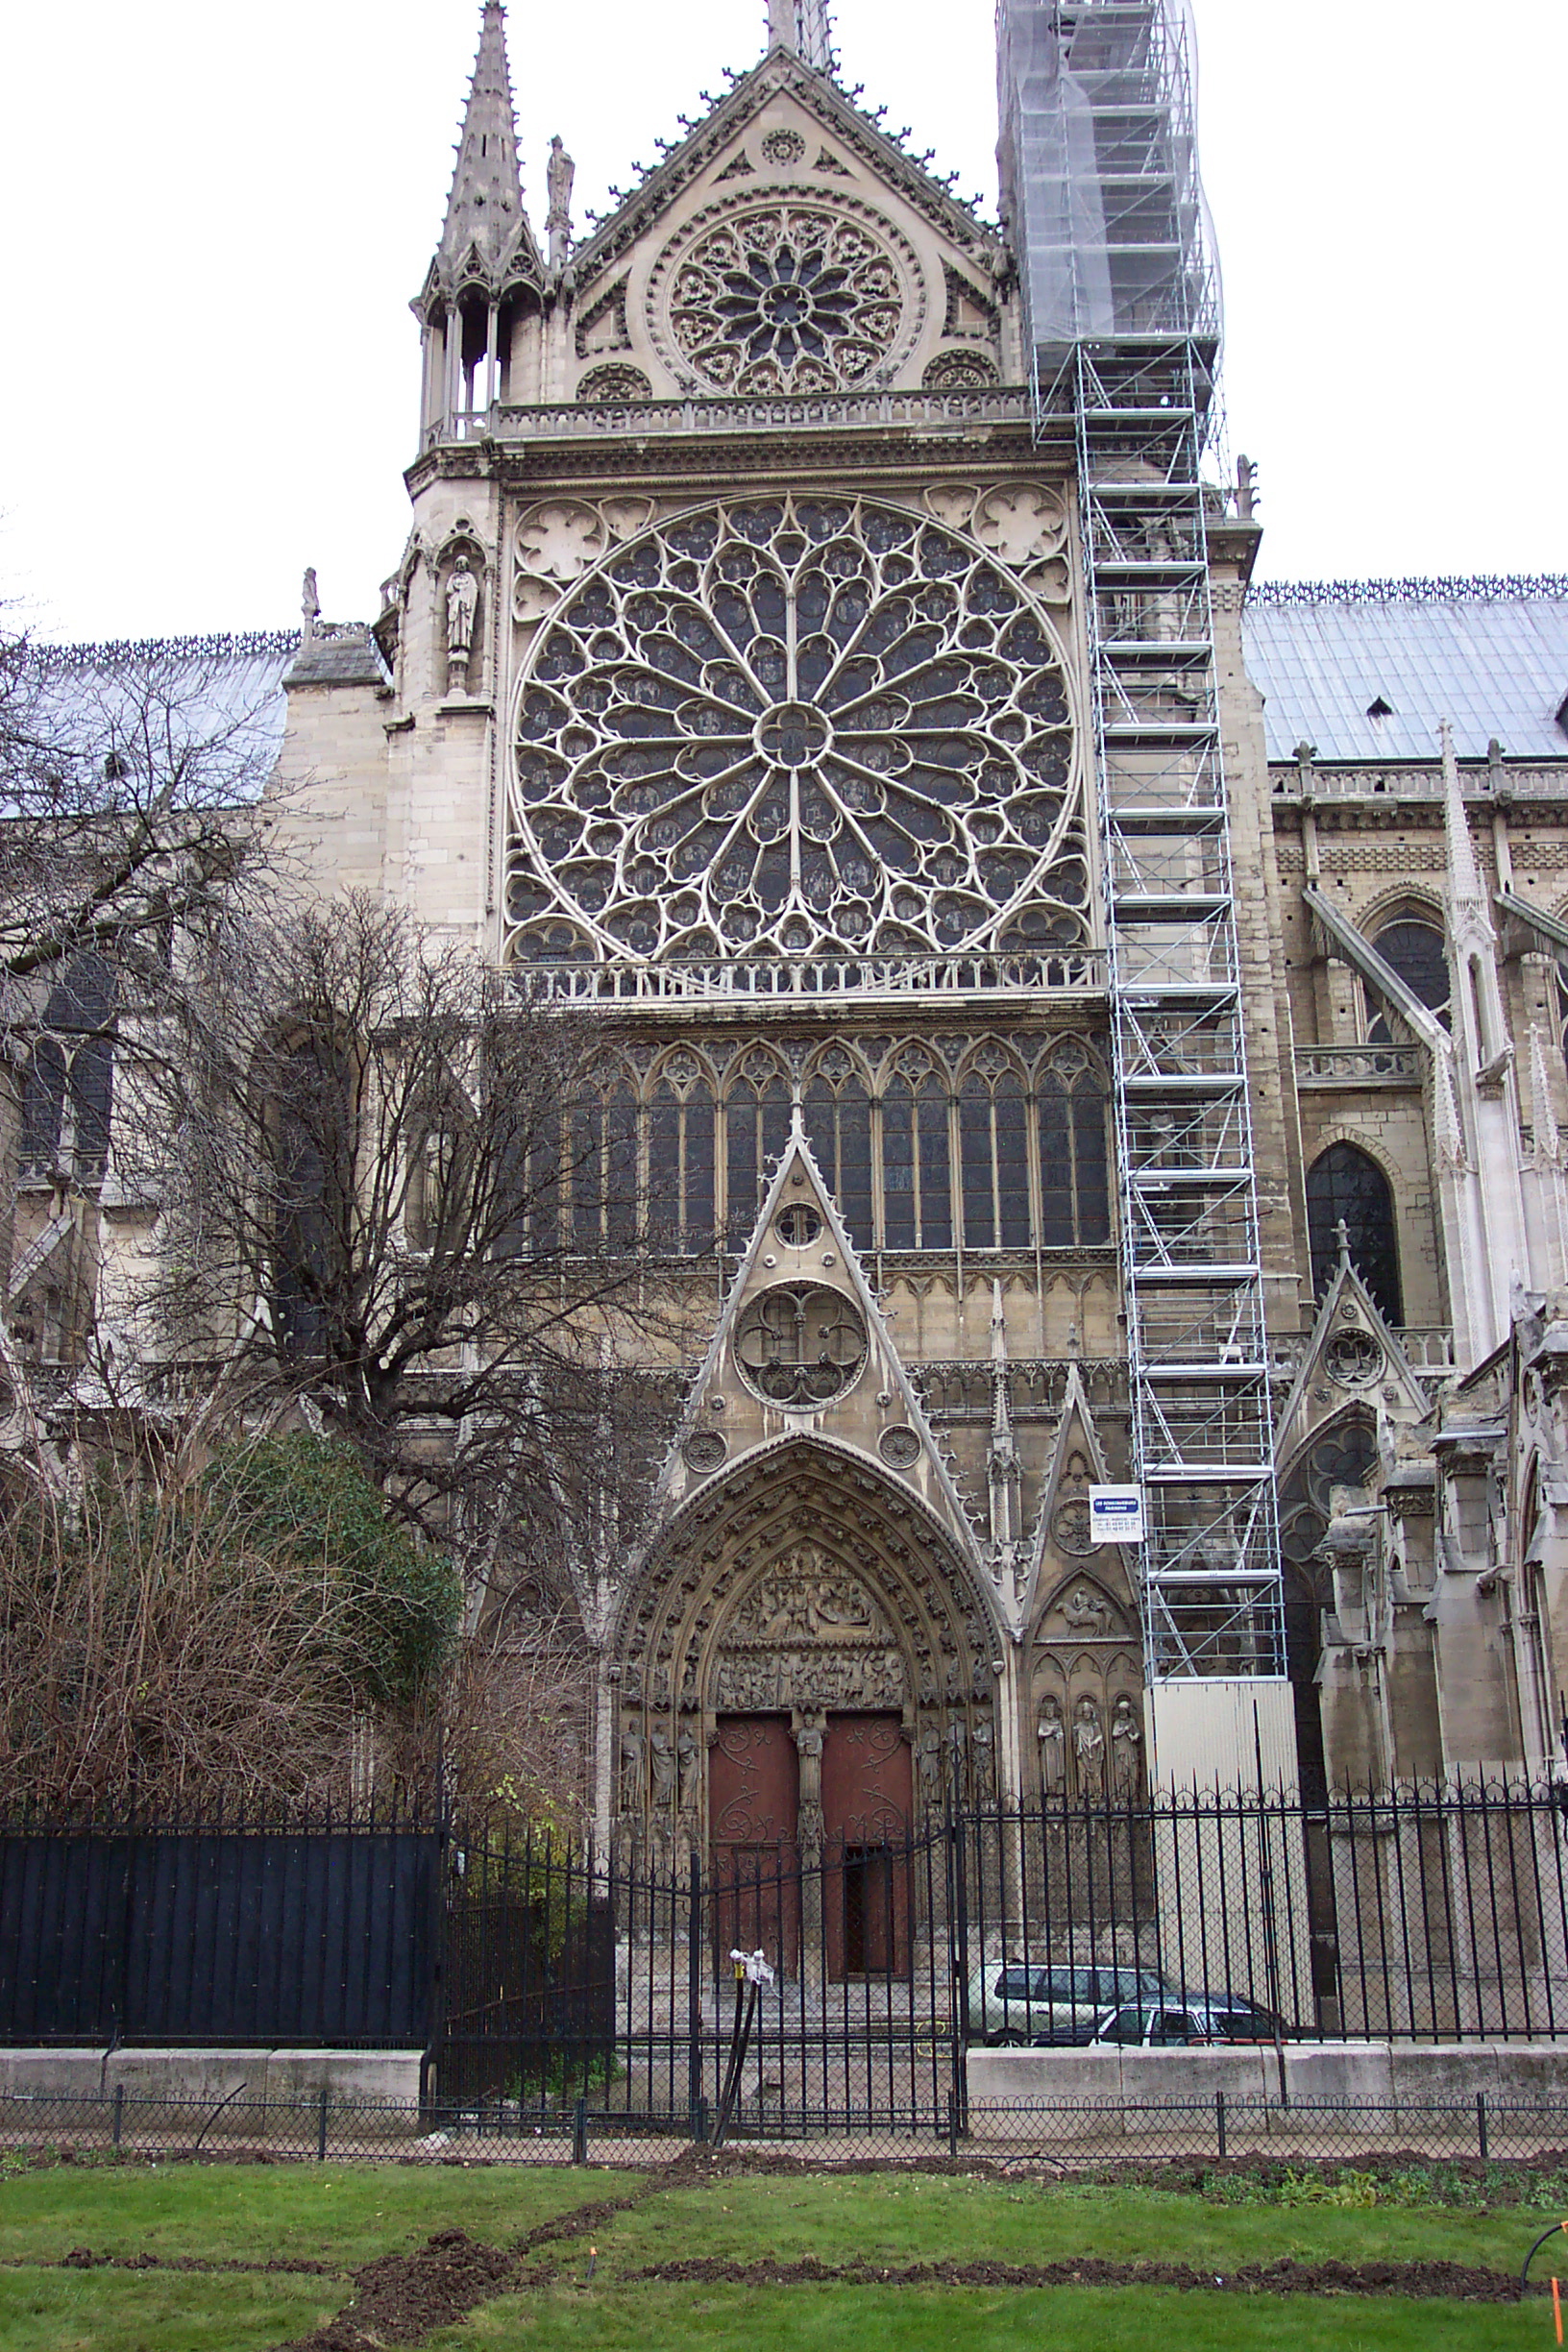 But Notre Dame is beautiful from the outside, too.